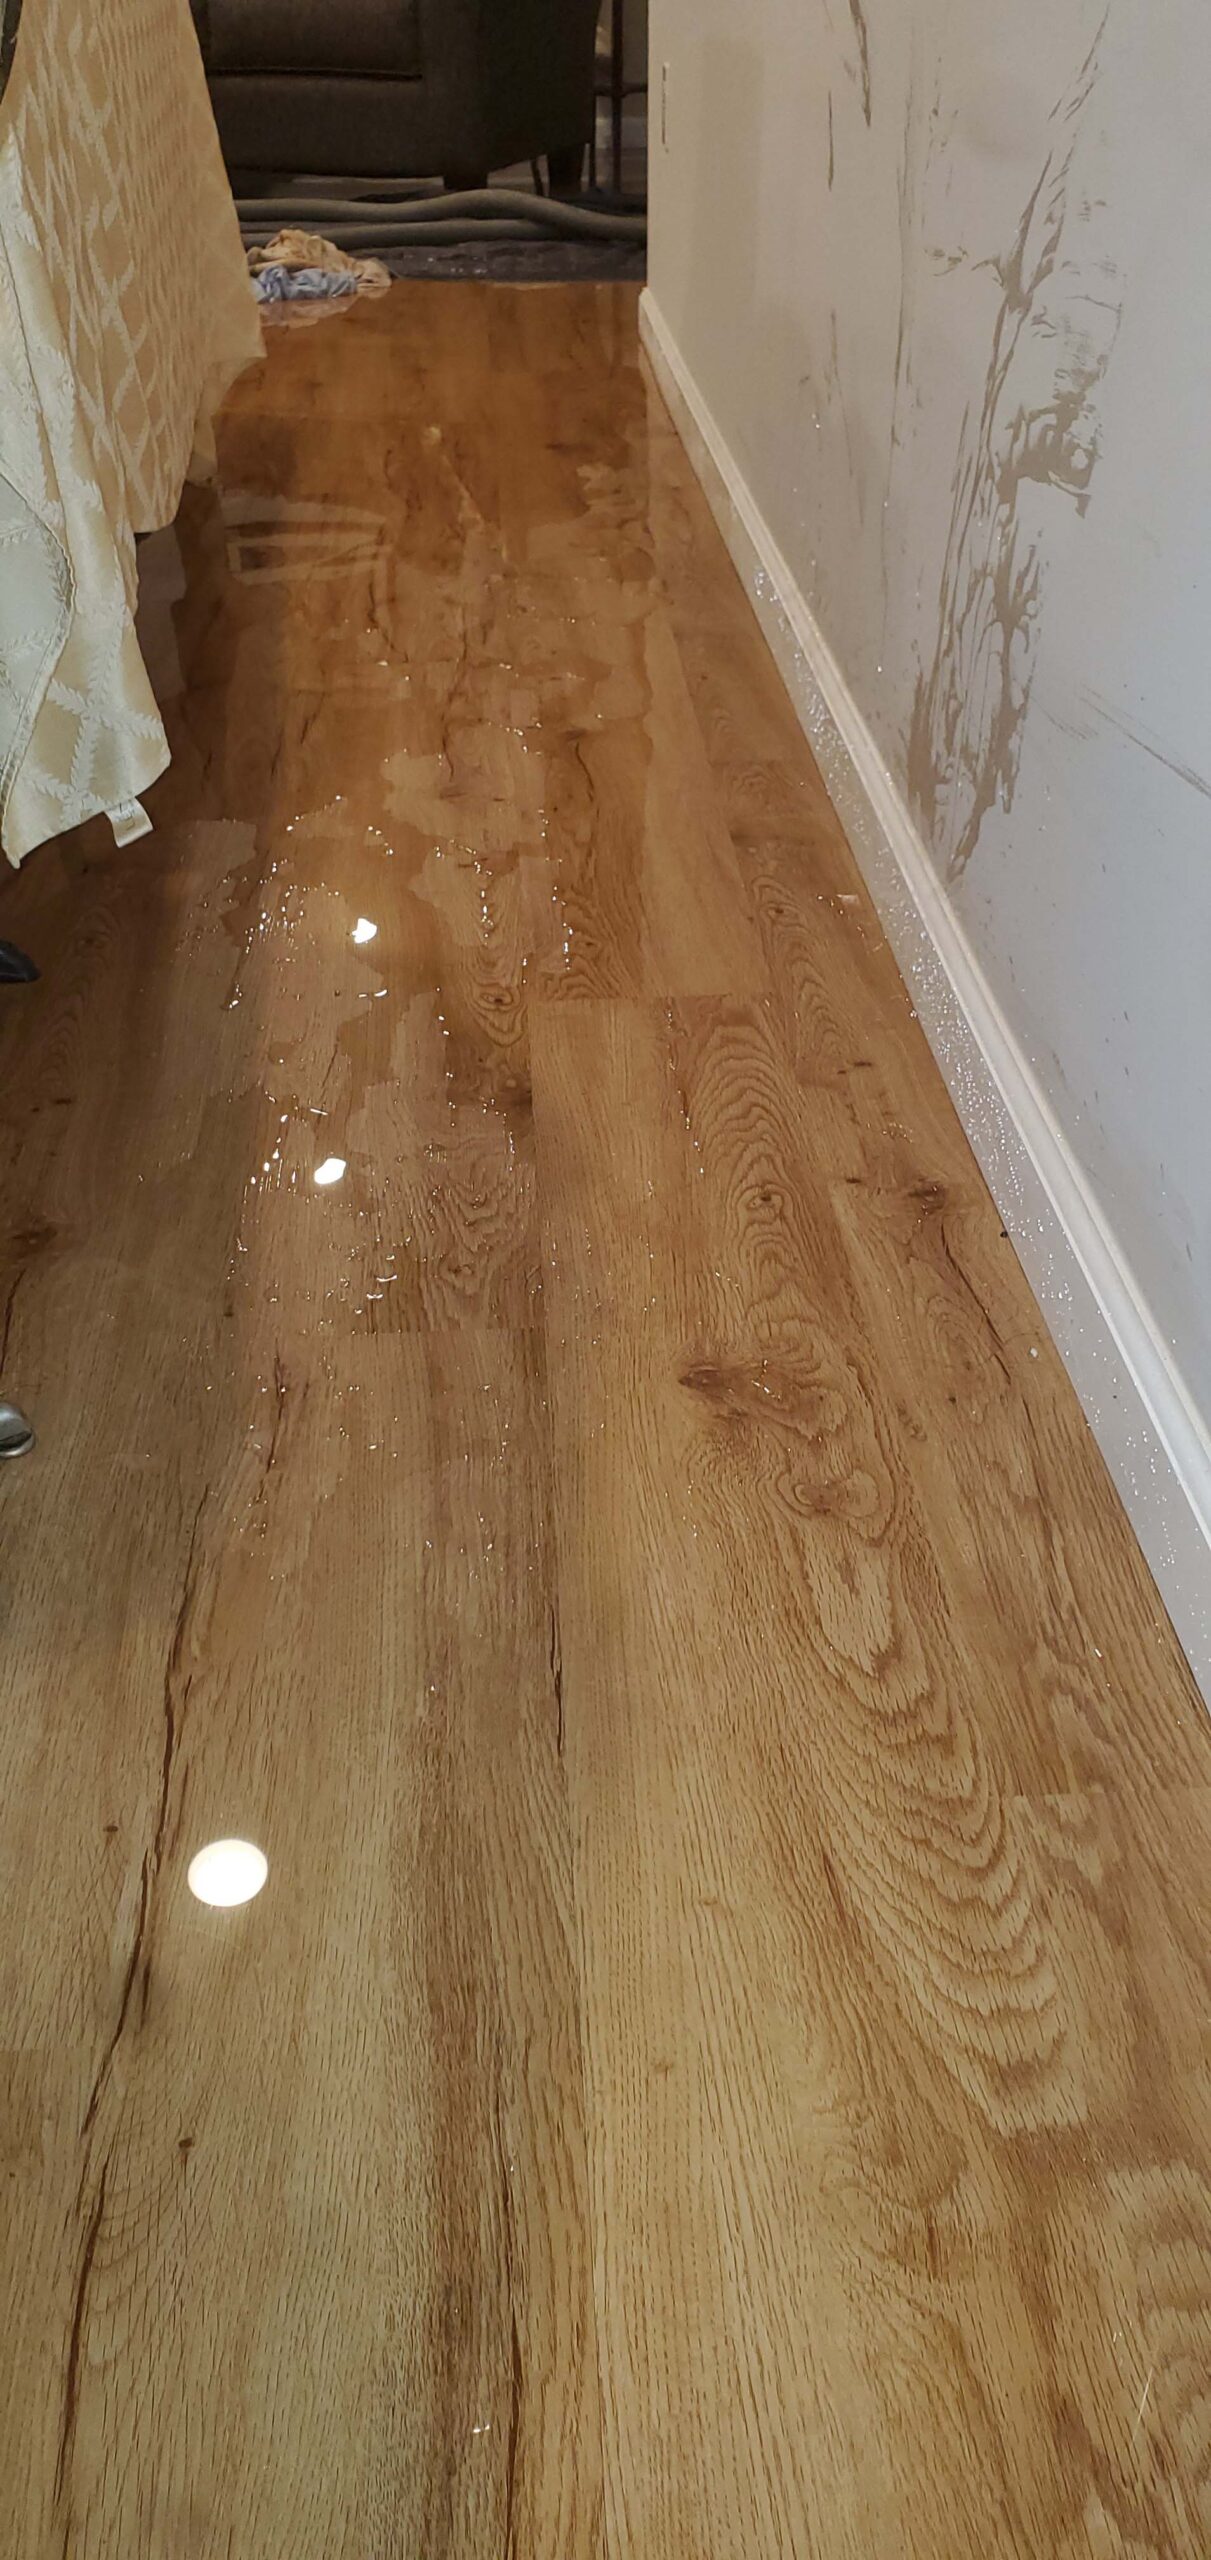 water damage repairs in plainview, ny 11803